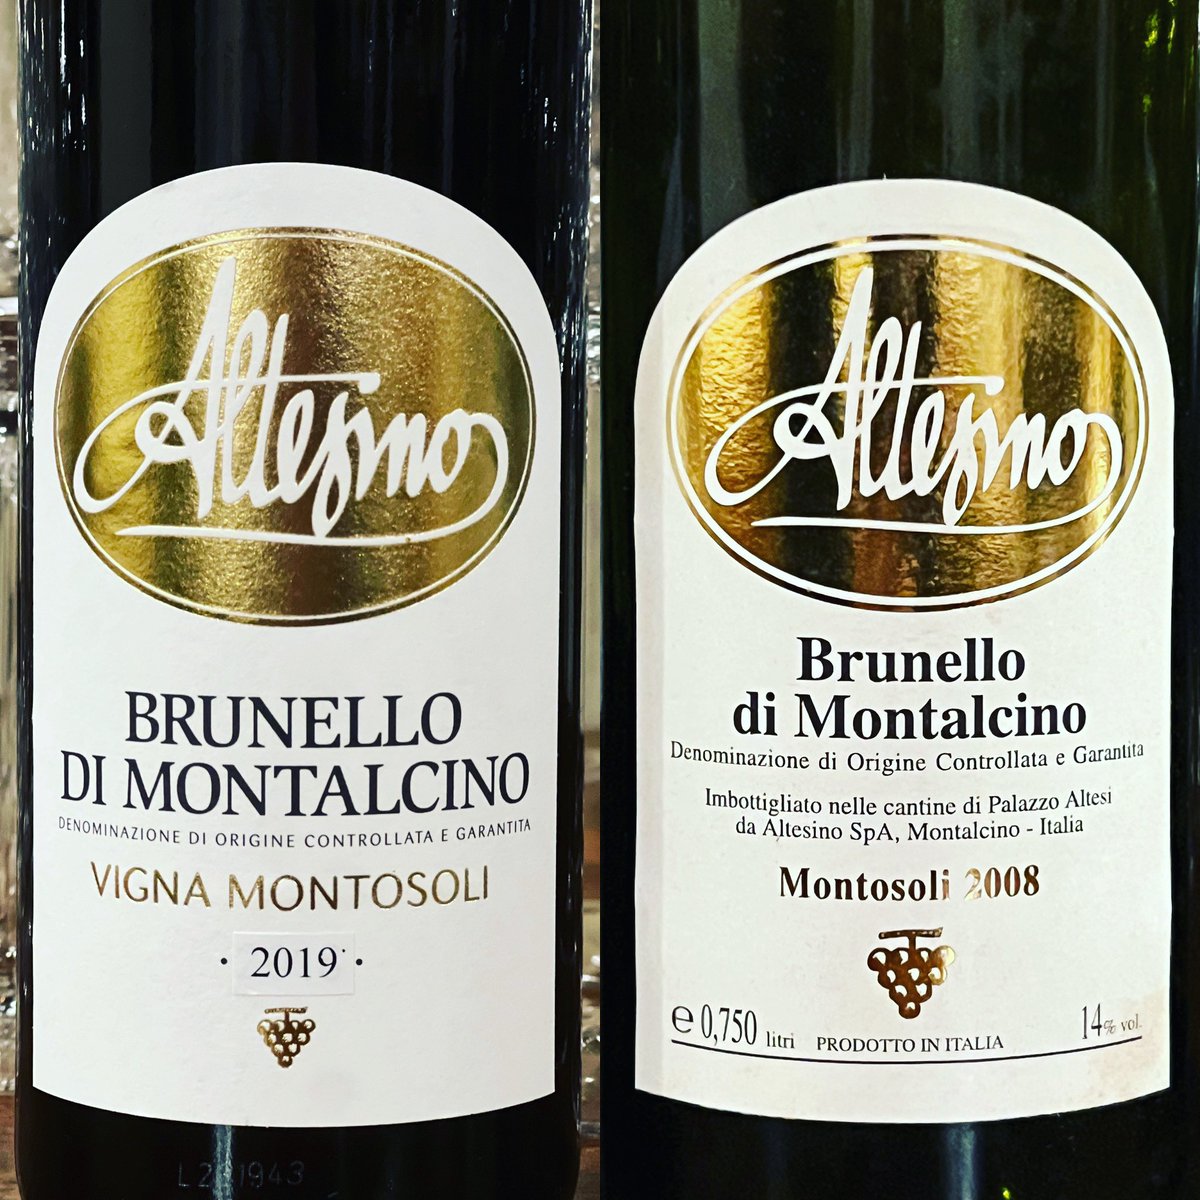 Perched on a 320m hill in the N part of Brunello DOCG, Montosoli is its best-known cru. 
Altesino are the largest producer, brilliantly showcasing its cool, acid-driven, tightly tannic expression of Sangiovese: blueberries on a trip to Svalbard.

#benvenutobrunello